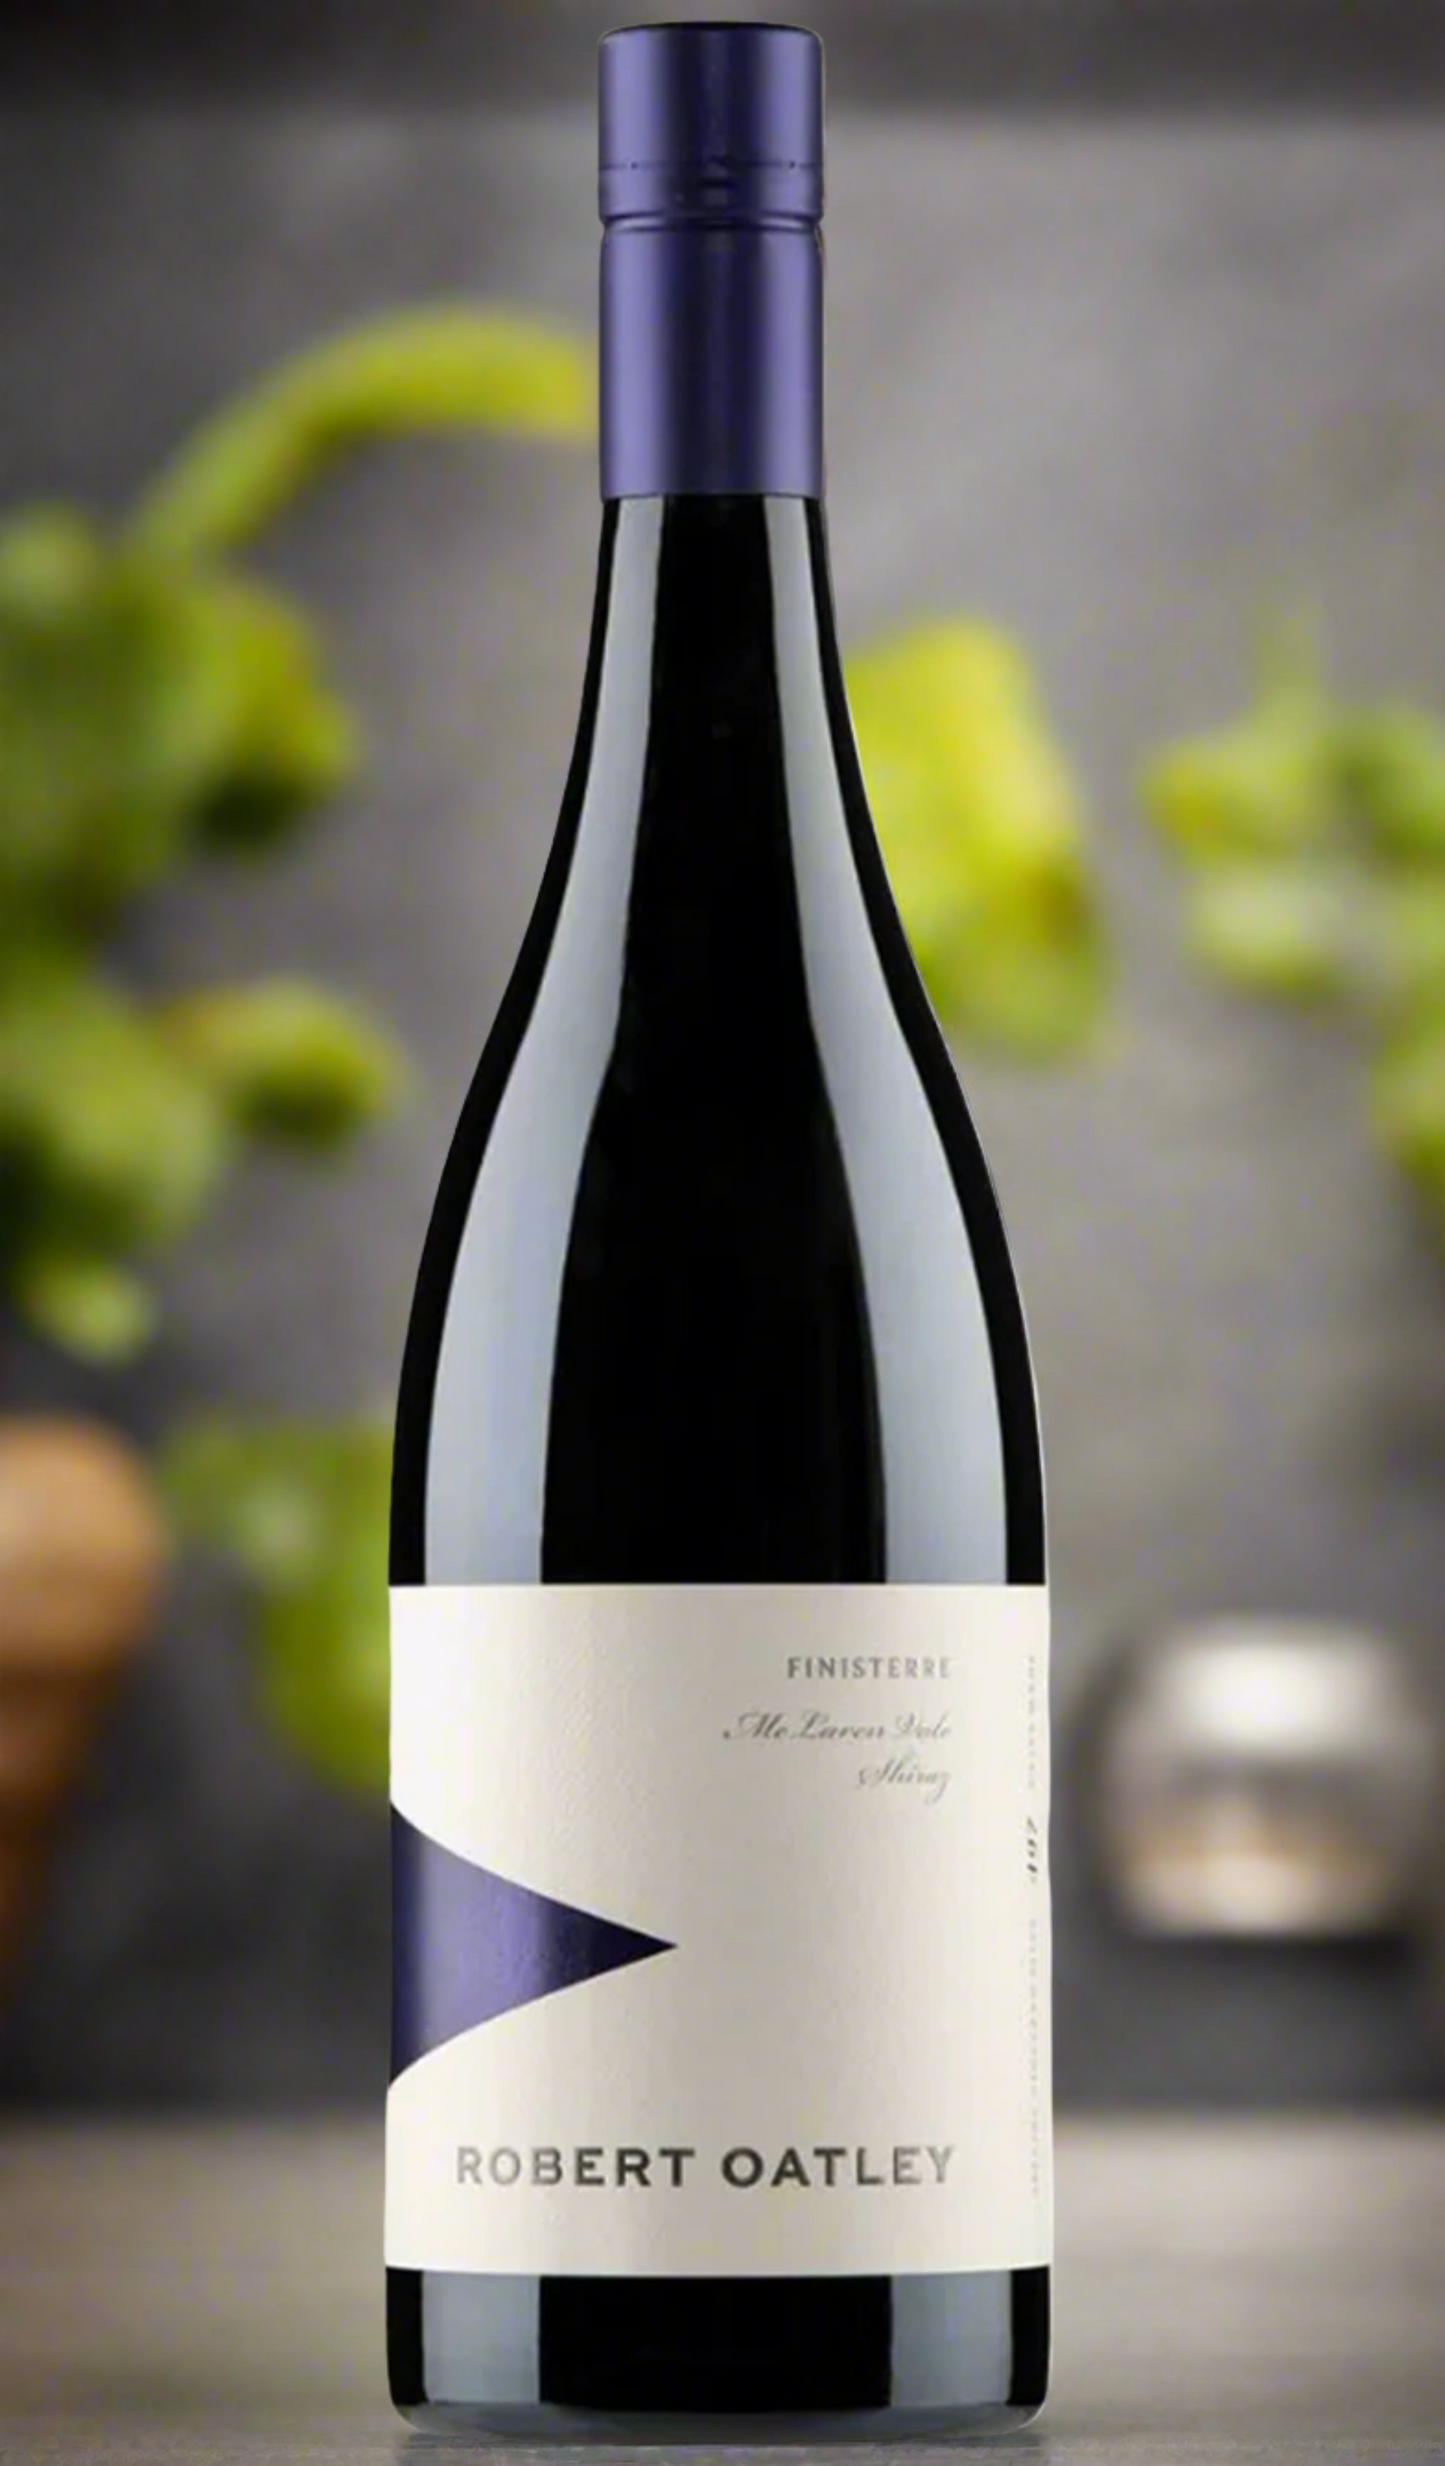 Find out more, explore the range and buy Robert Oatley Finisterre Shiraz 2018 (McLaren Vale) available online at Wine Sellers Direct - Australia's independent liquor specialists.